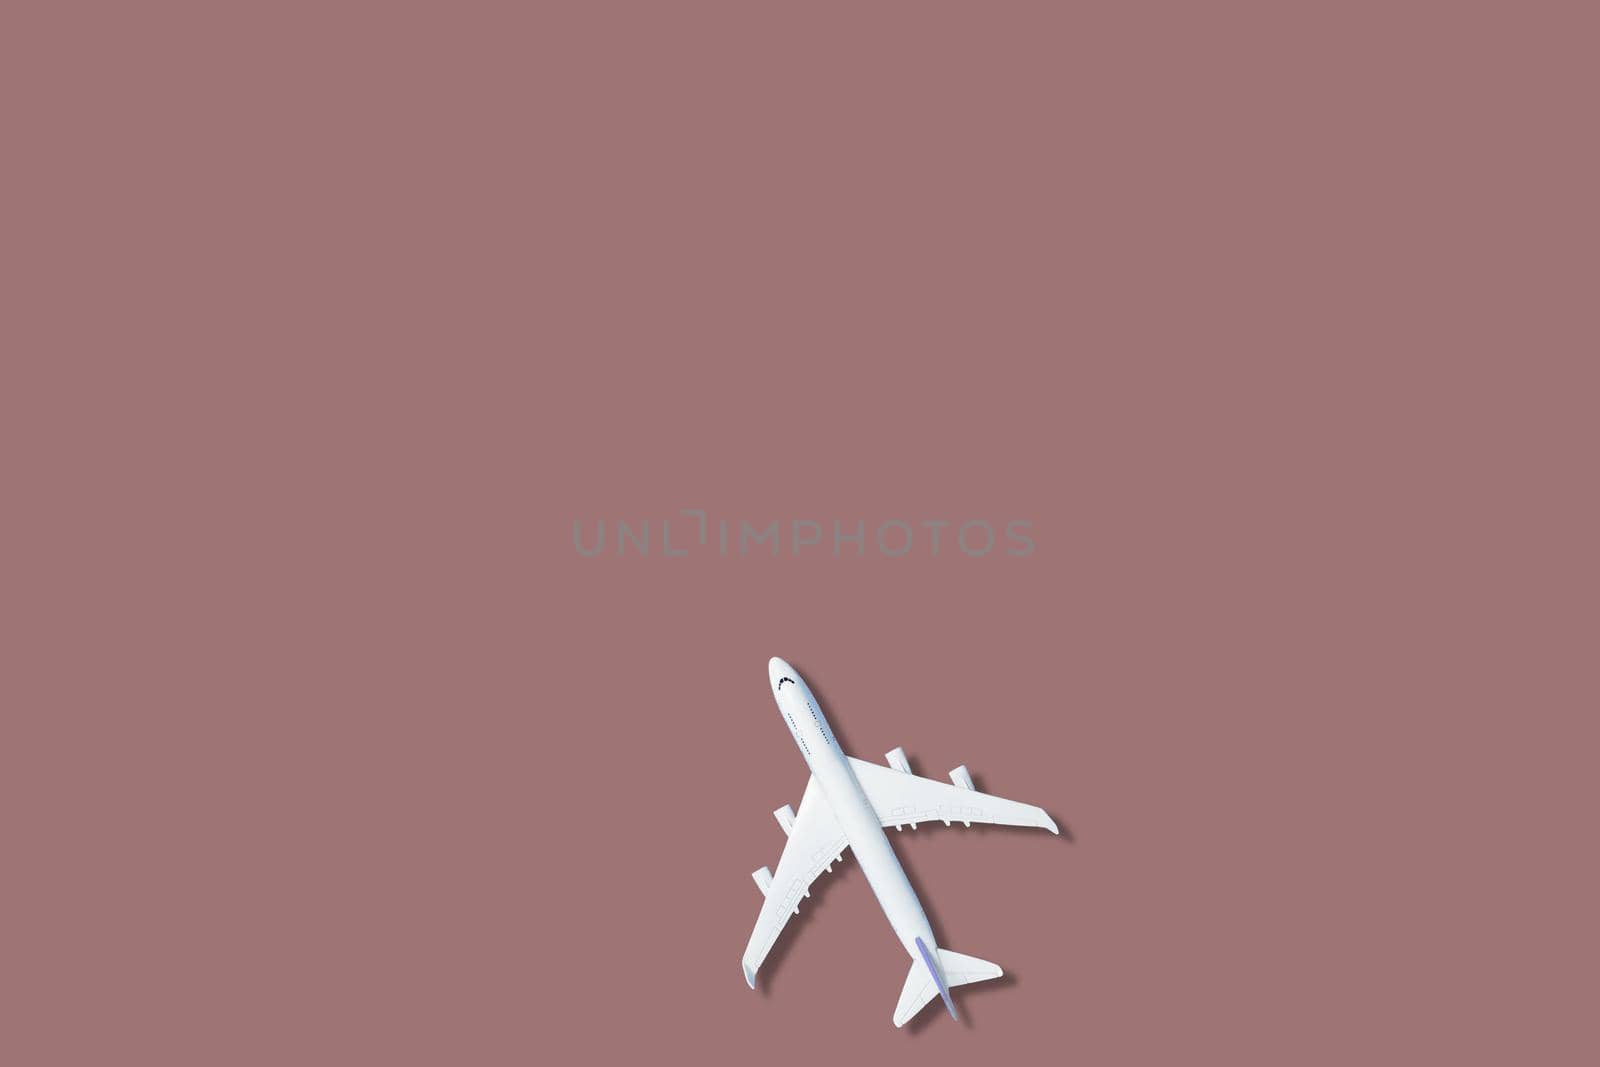 airplane figure on pink background